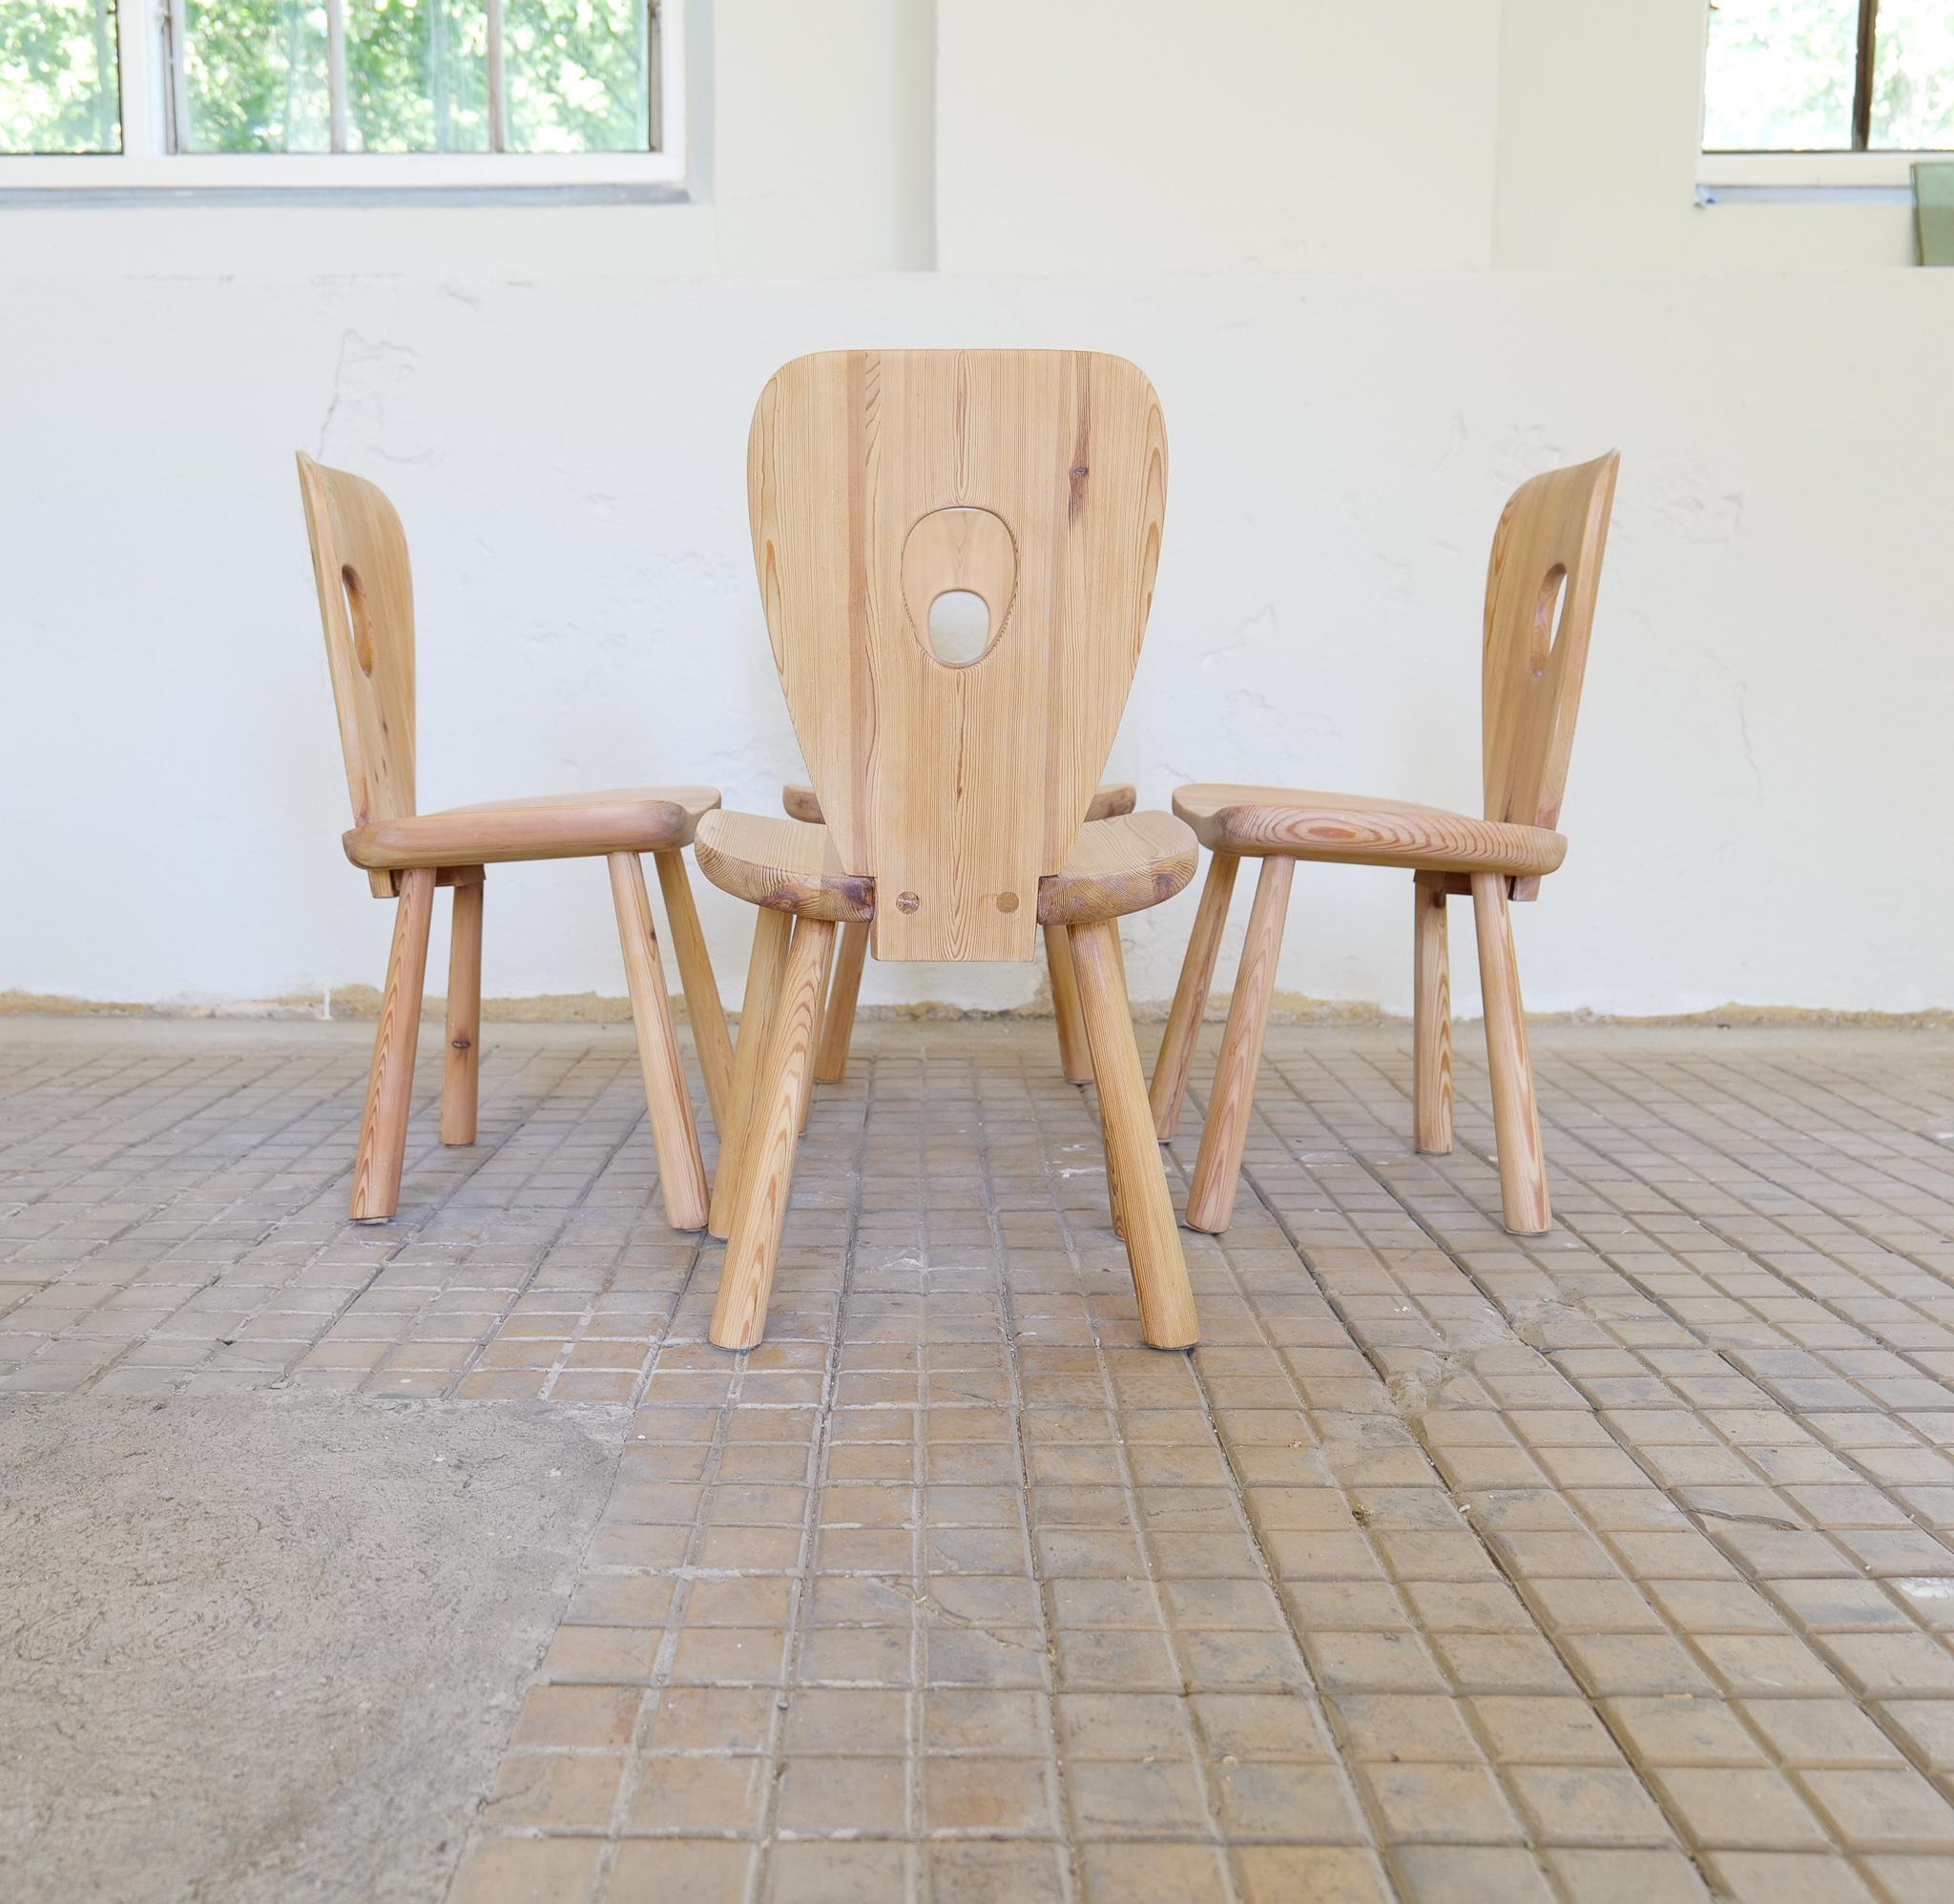 Swedish Sculptural Dining Chairs in Pine Bo Fjaestad, Sweden 1930s For Sale 3